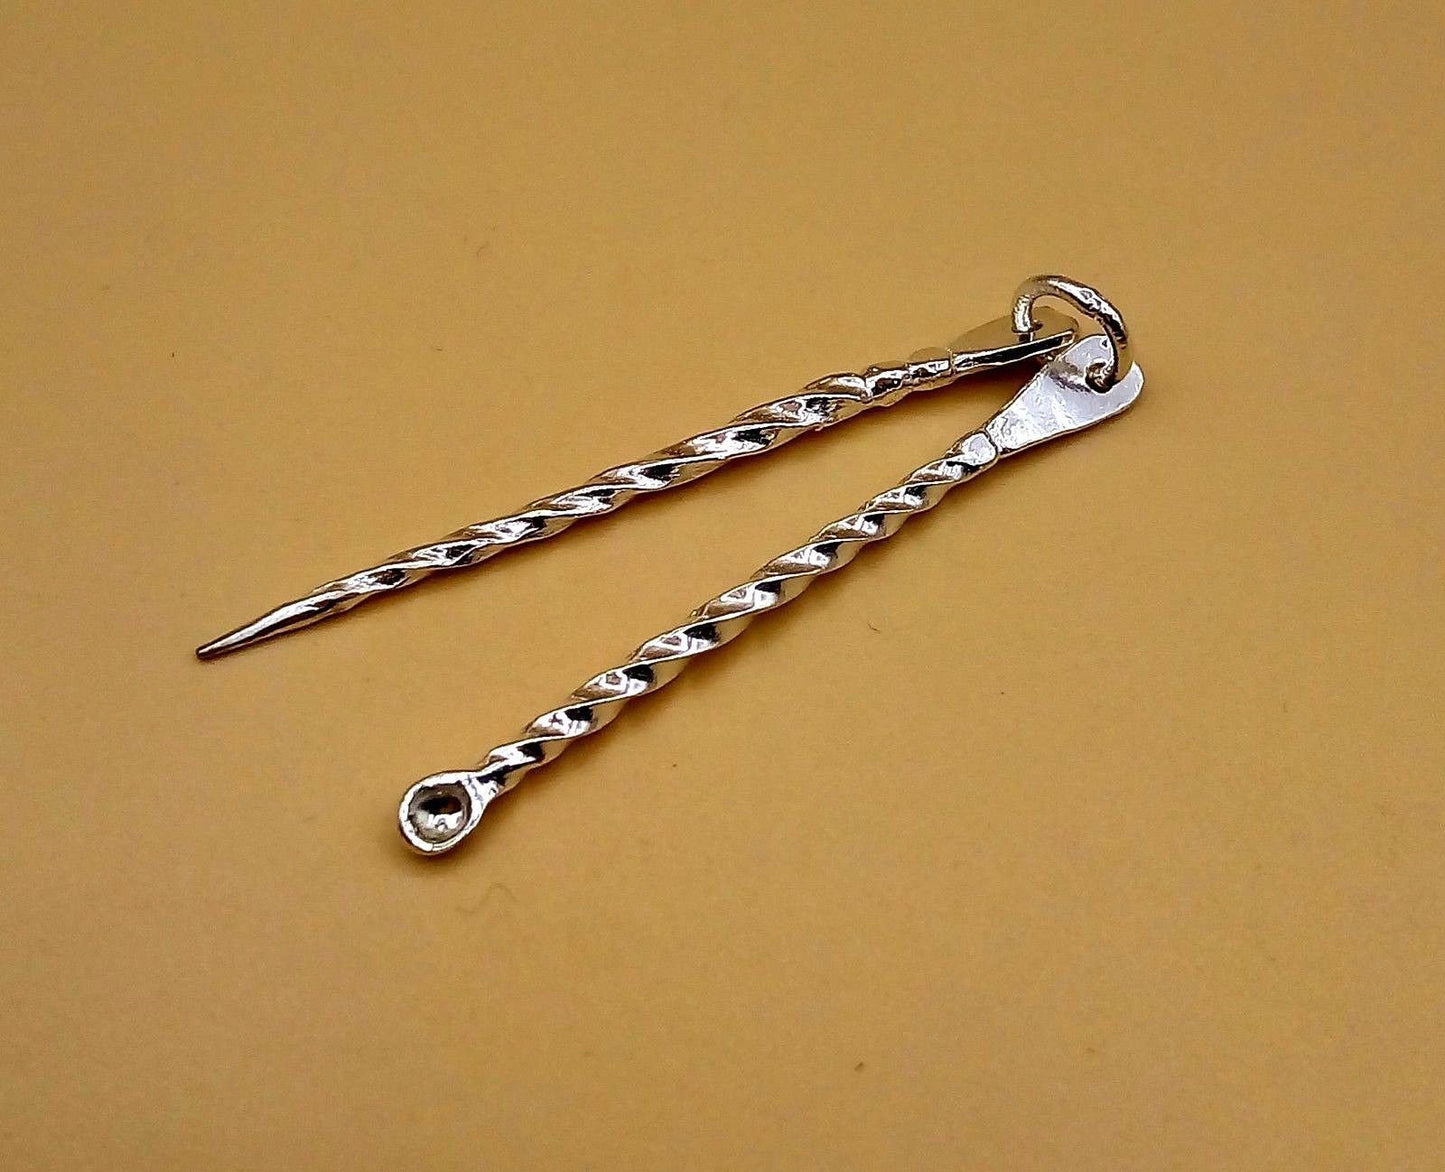 Silver handmade teeth cleaner and ear wax removal silver sticks fabulous twisted shape design - TRIBAL ORNAMENTS